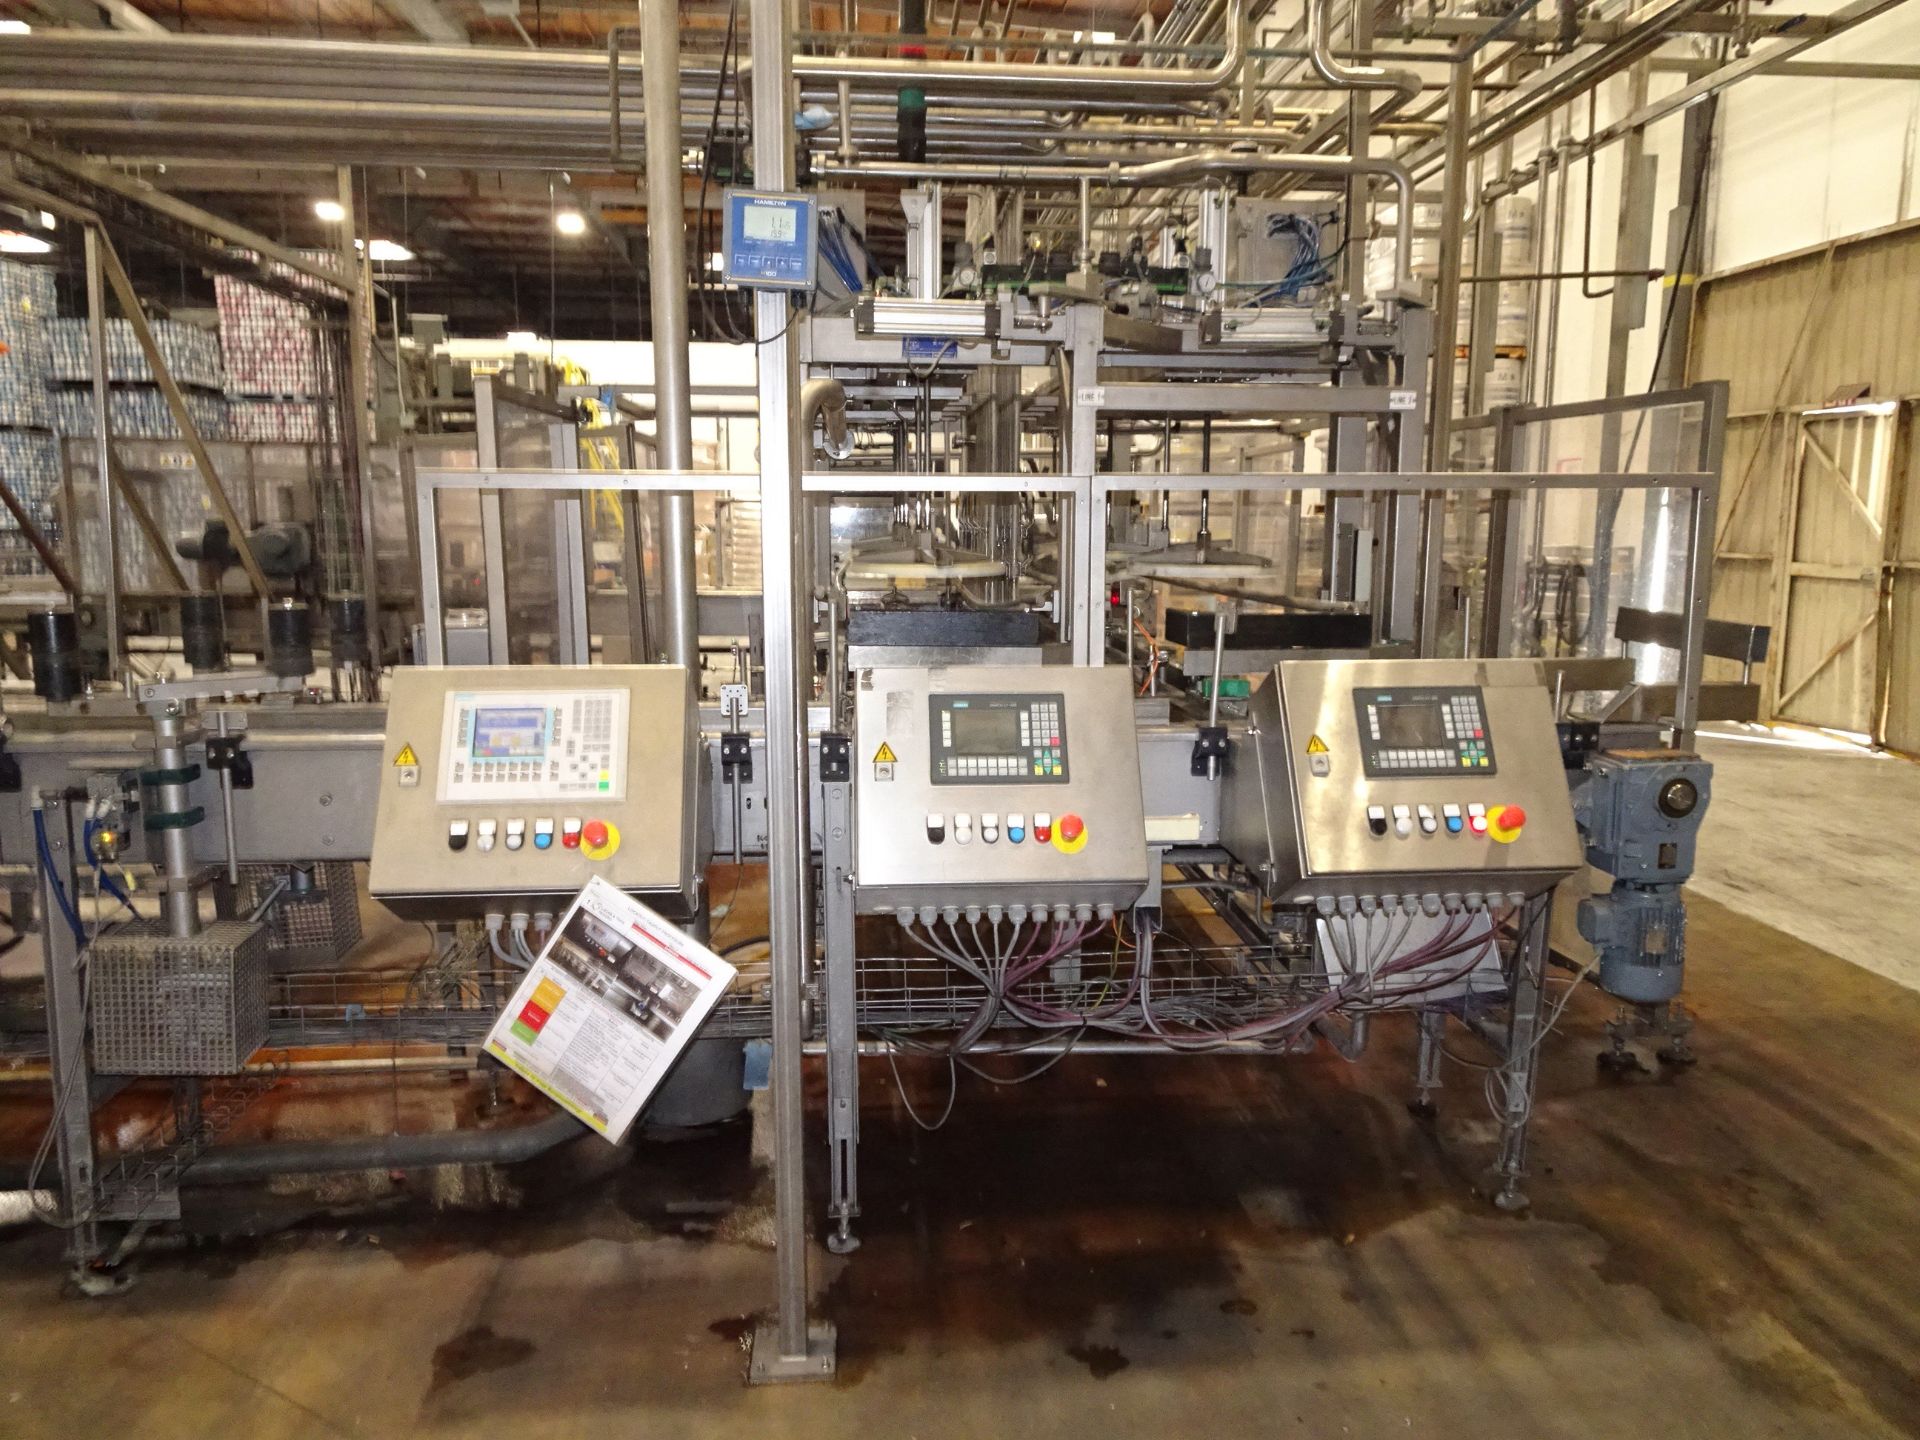 2006 KHS Keg Line For 5 & 15 Gallon Kegs, Complete Twin 8-Station Filling Line Rate - Contact Rigger - Image 23 of 83